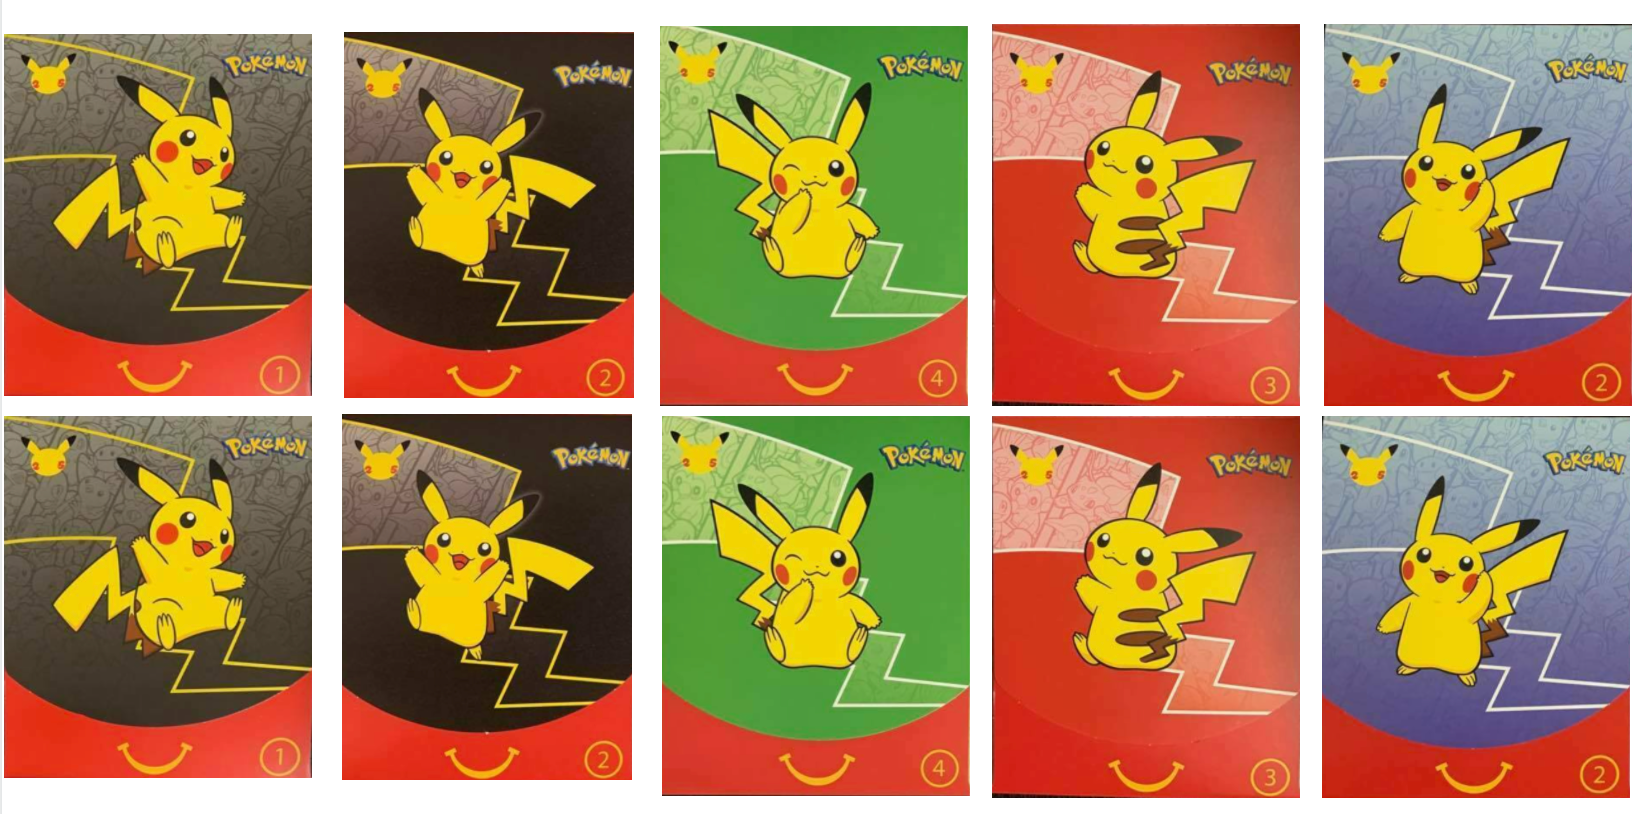 Details about   2021 Mcdonalds happy meals entire collection Pokemon 25th Anniversary  SET of 4